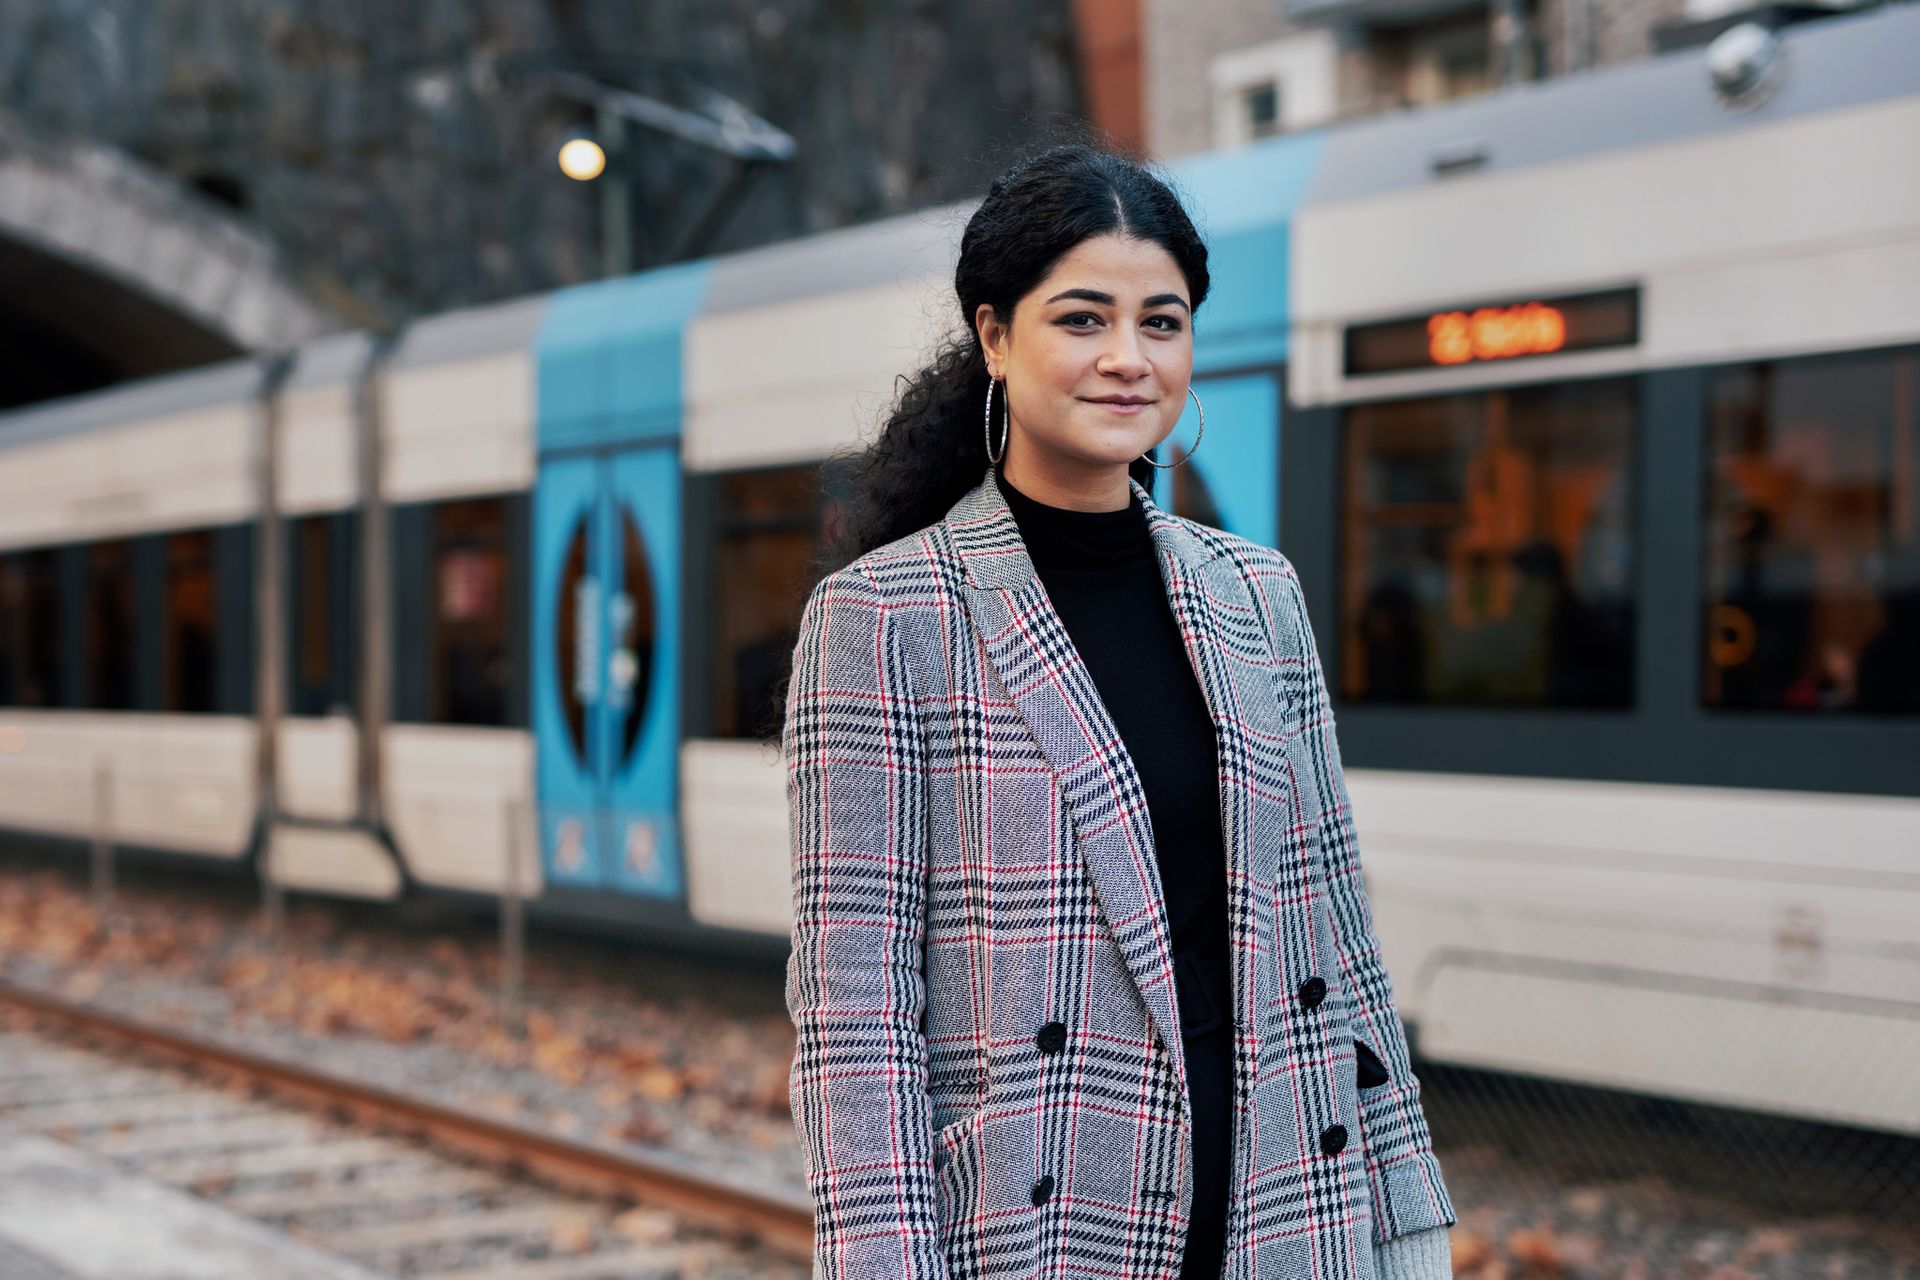 International student from Brazil standing in front of a tram in Sweden